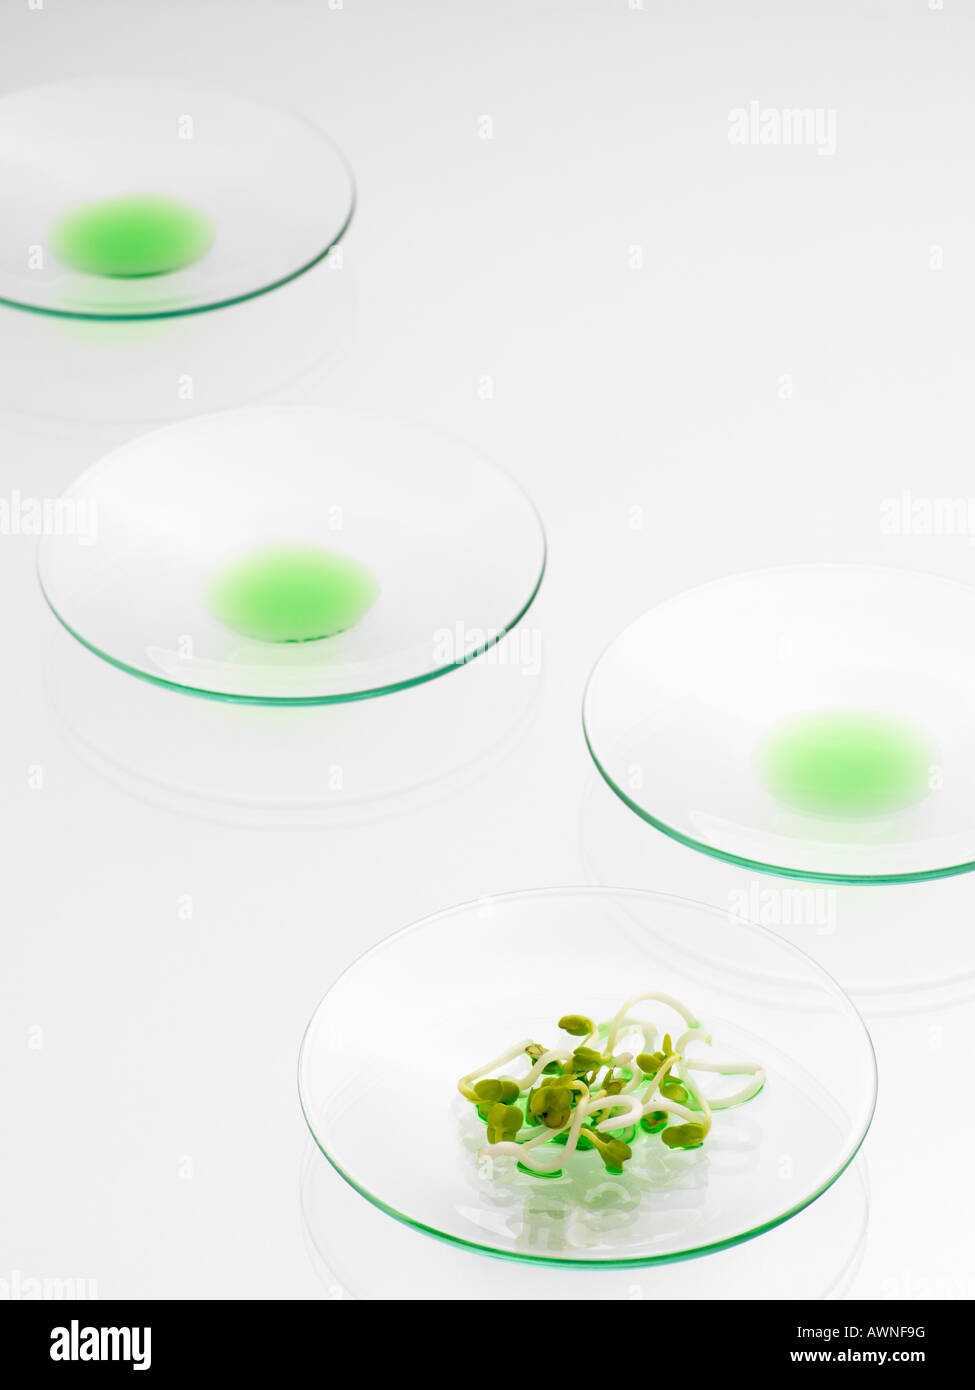 Sprouts on a petri dish Stock Photo